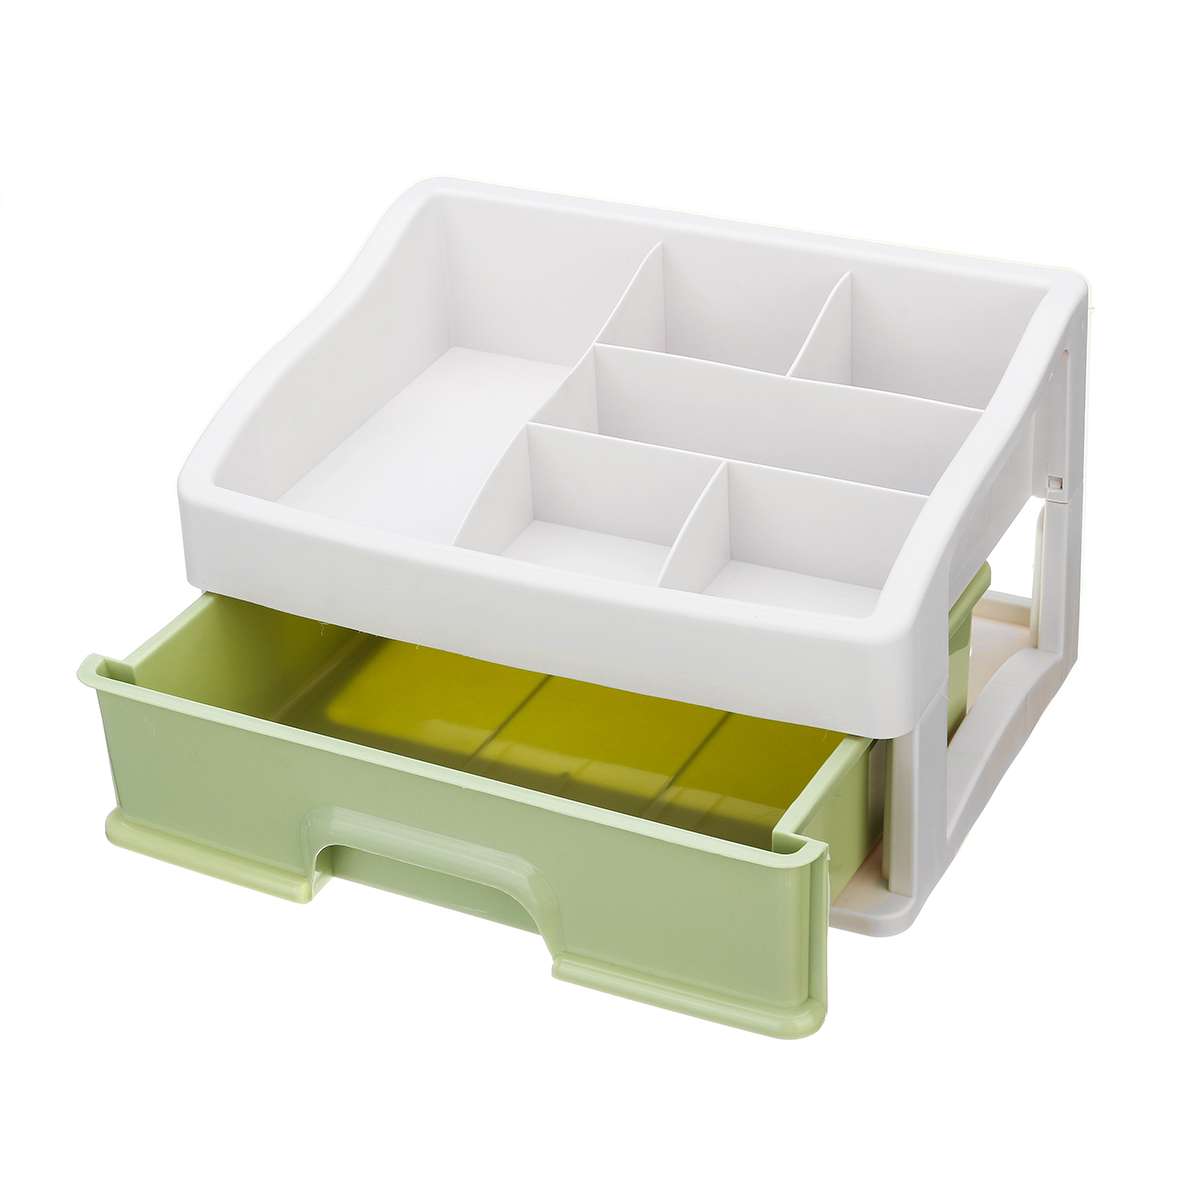 Plastic-Makeup-Holder-Box-Storage-Desktop-Container-Cosmetic--Jewelry-Container-Table-Organizer-1563970-9